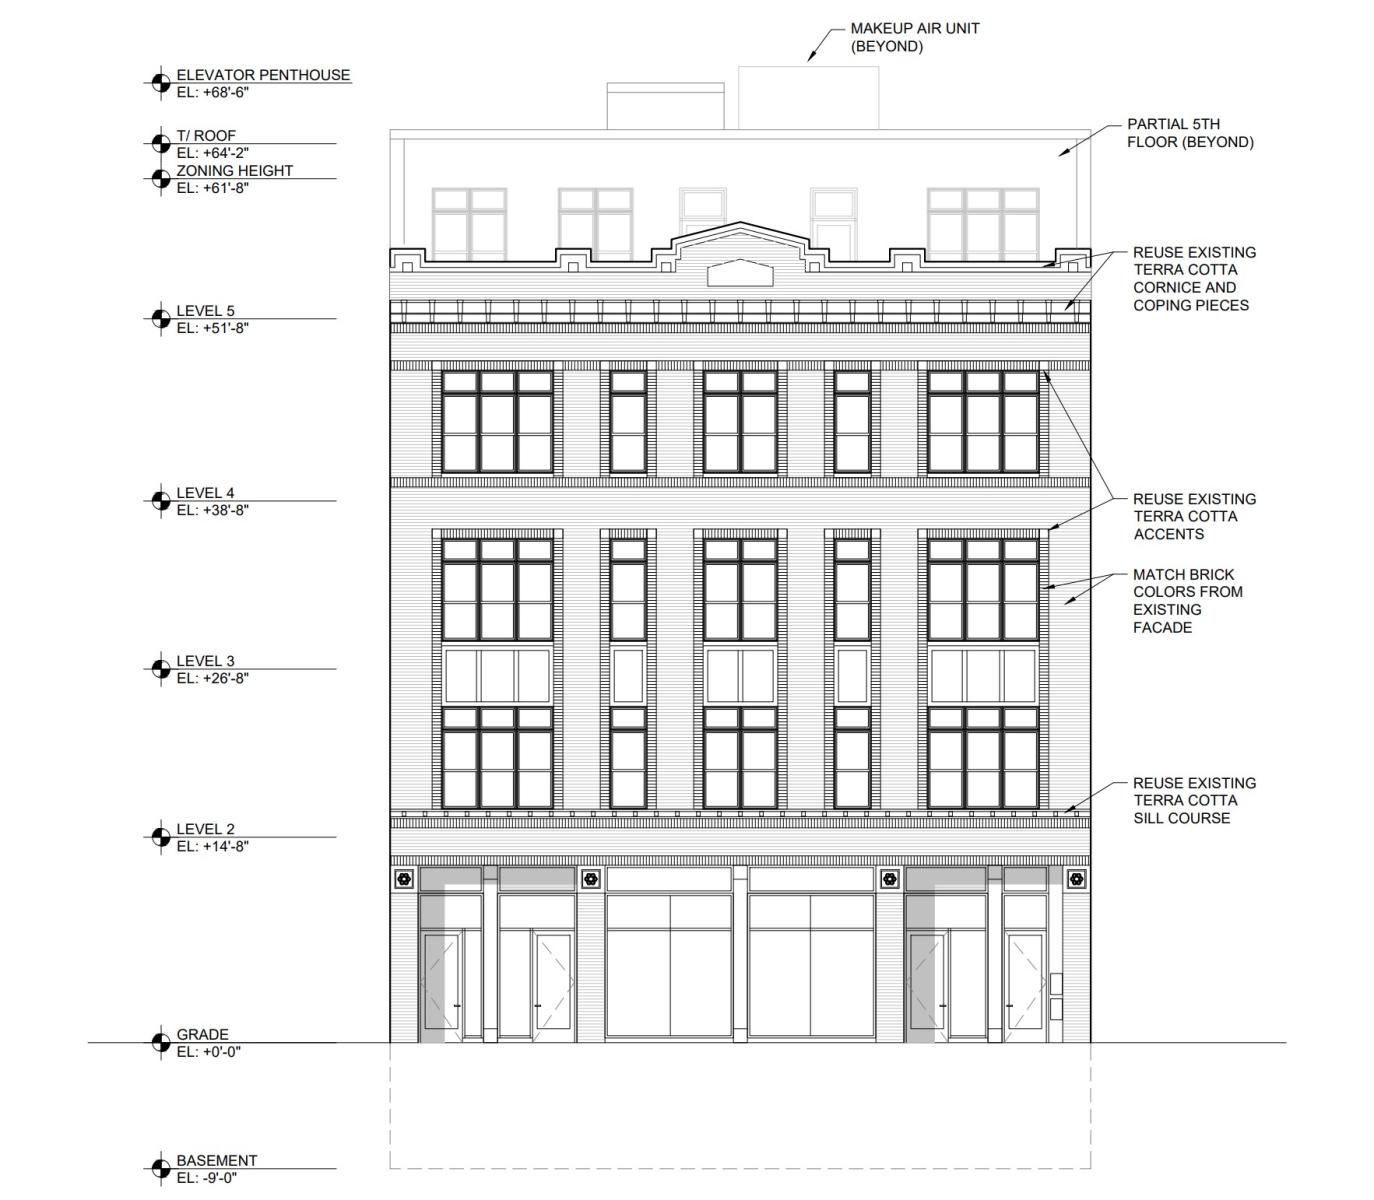 Demolition Permit Issued for 3160 N Broadway in Lakeview East - Chicago ...